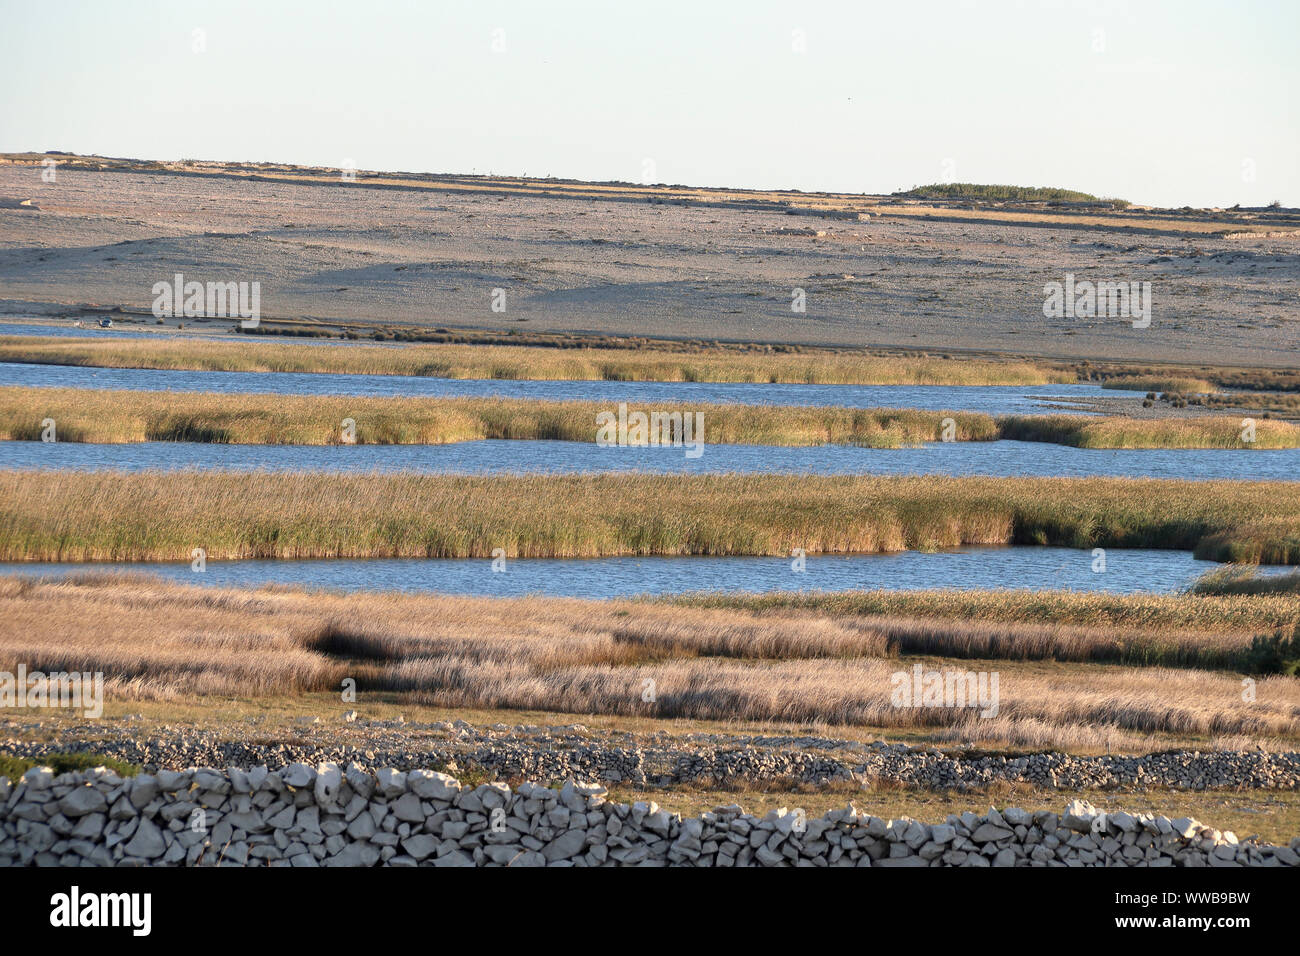 a lake overgrown with grass in a stone environment Stock Photo